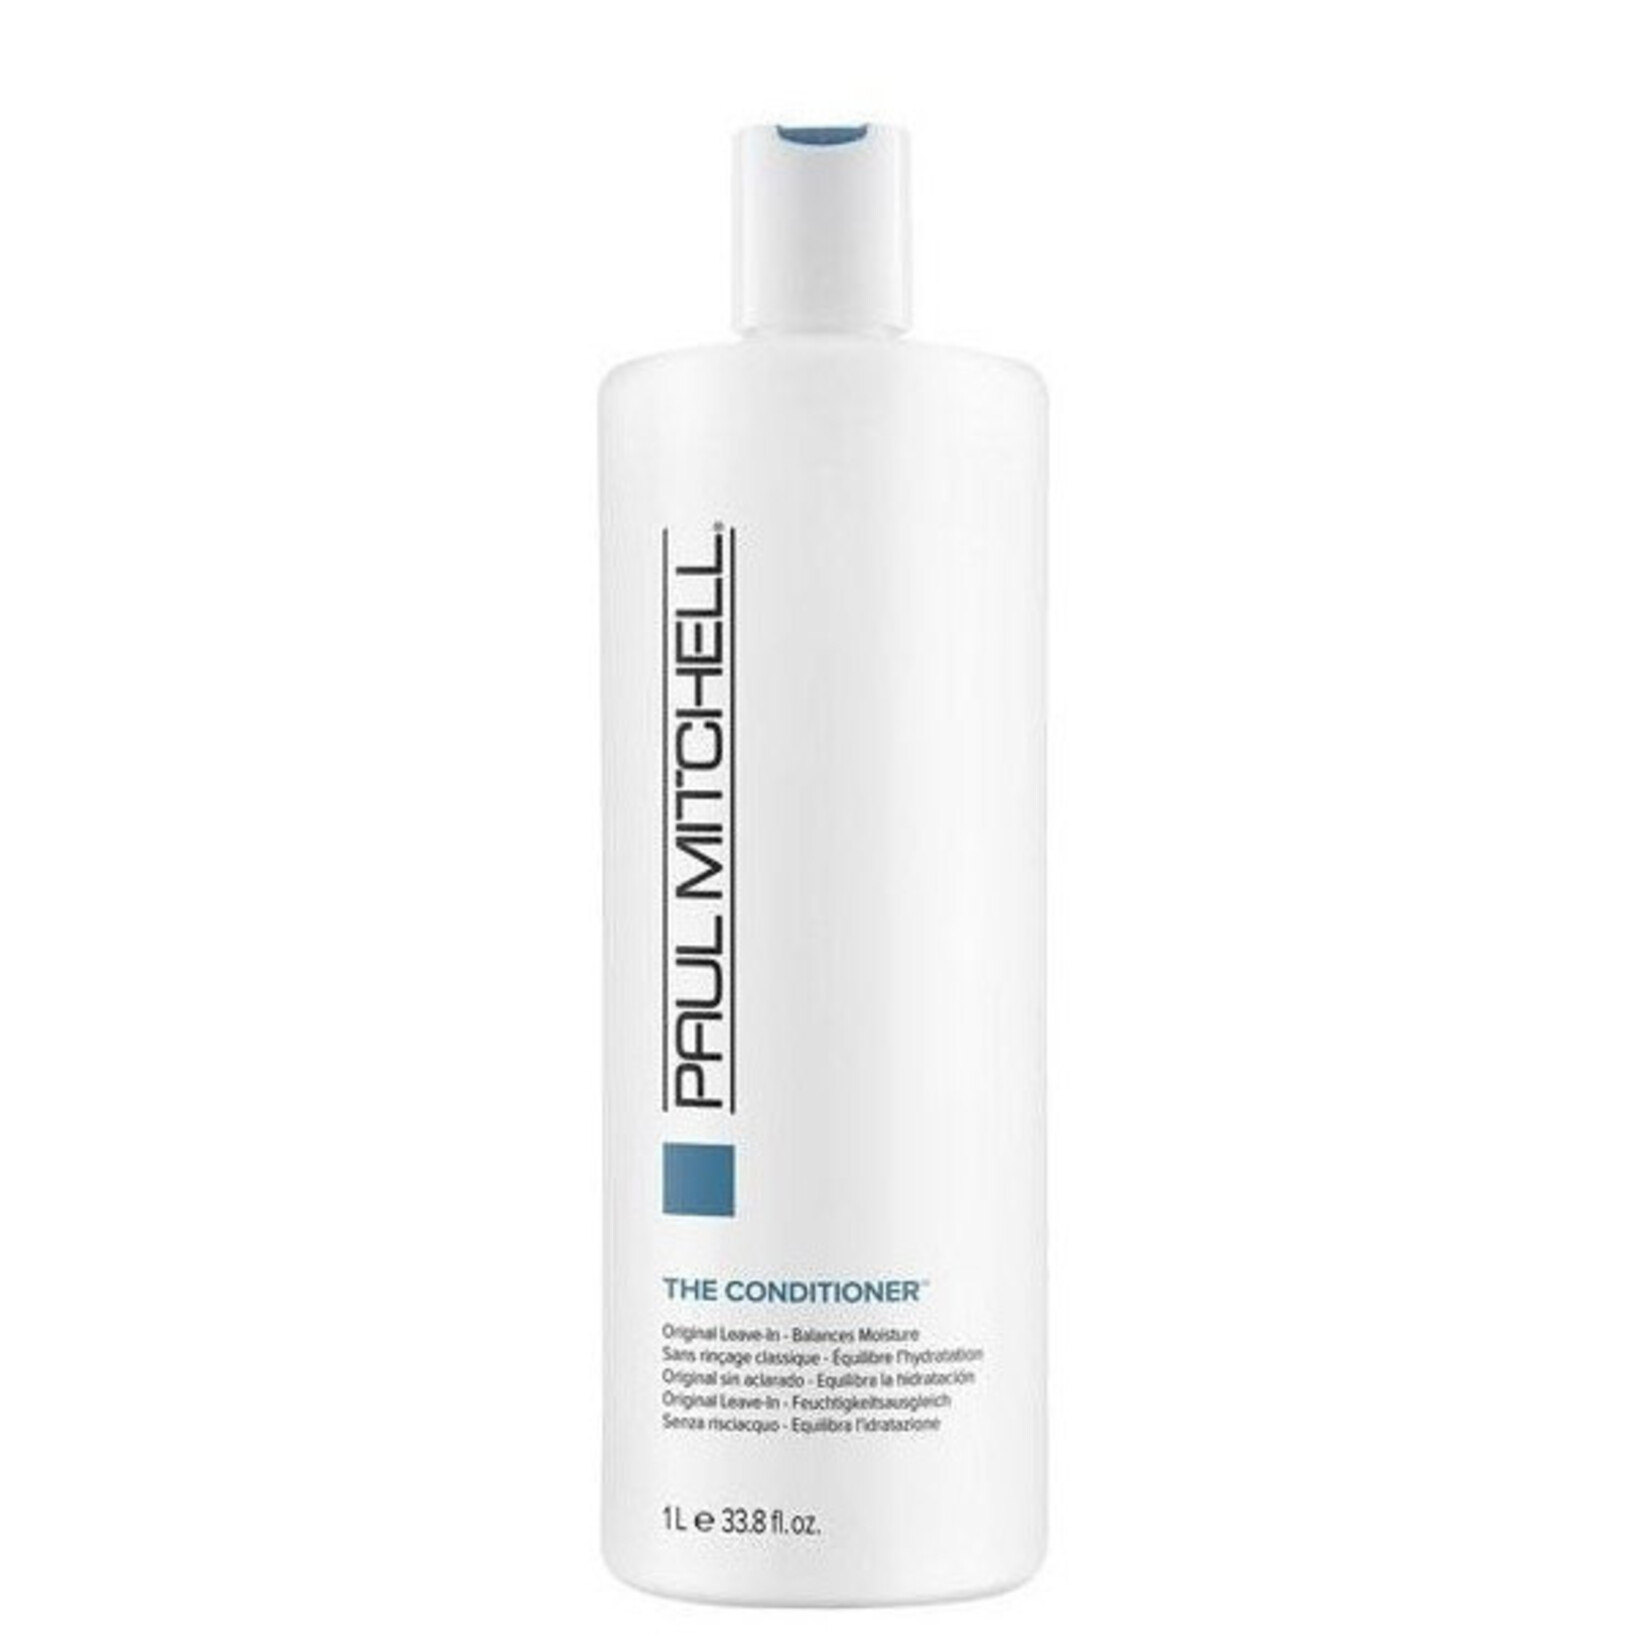 Paul Mitchell Paul Mitchell - Original - The Conditioner - Leave-In Conditioner Litre